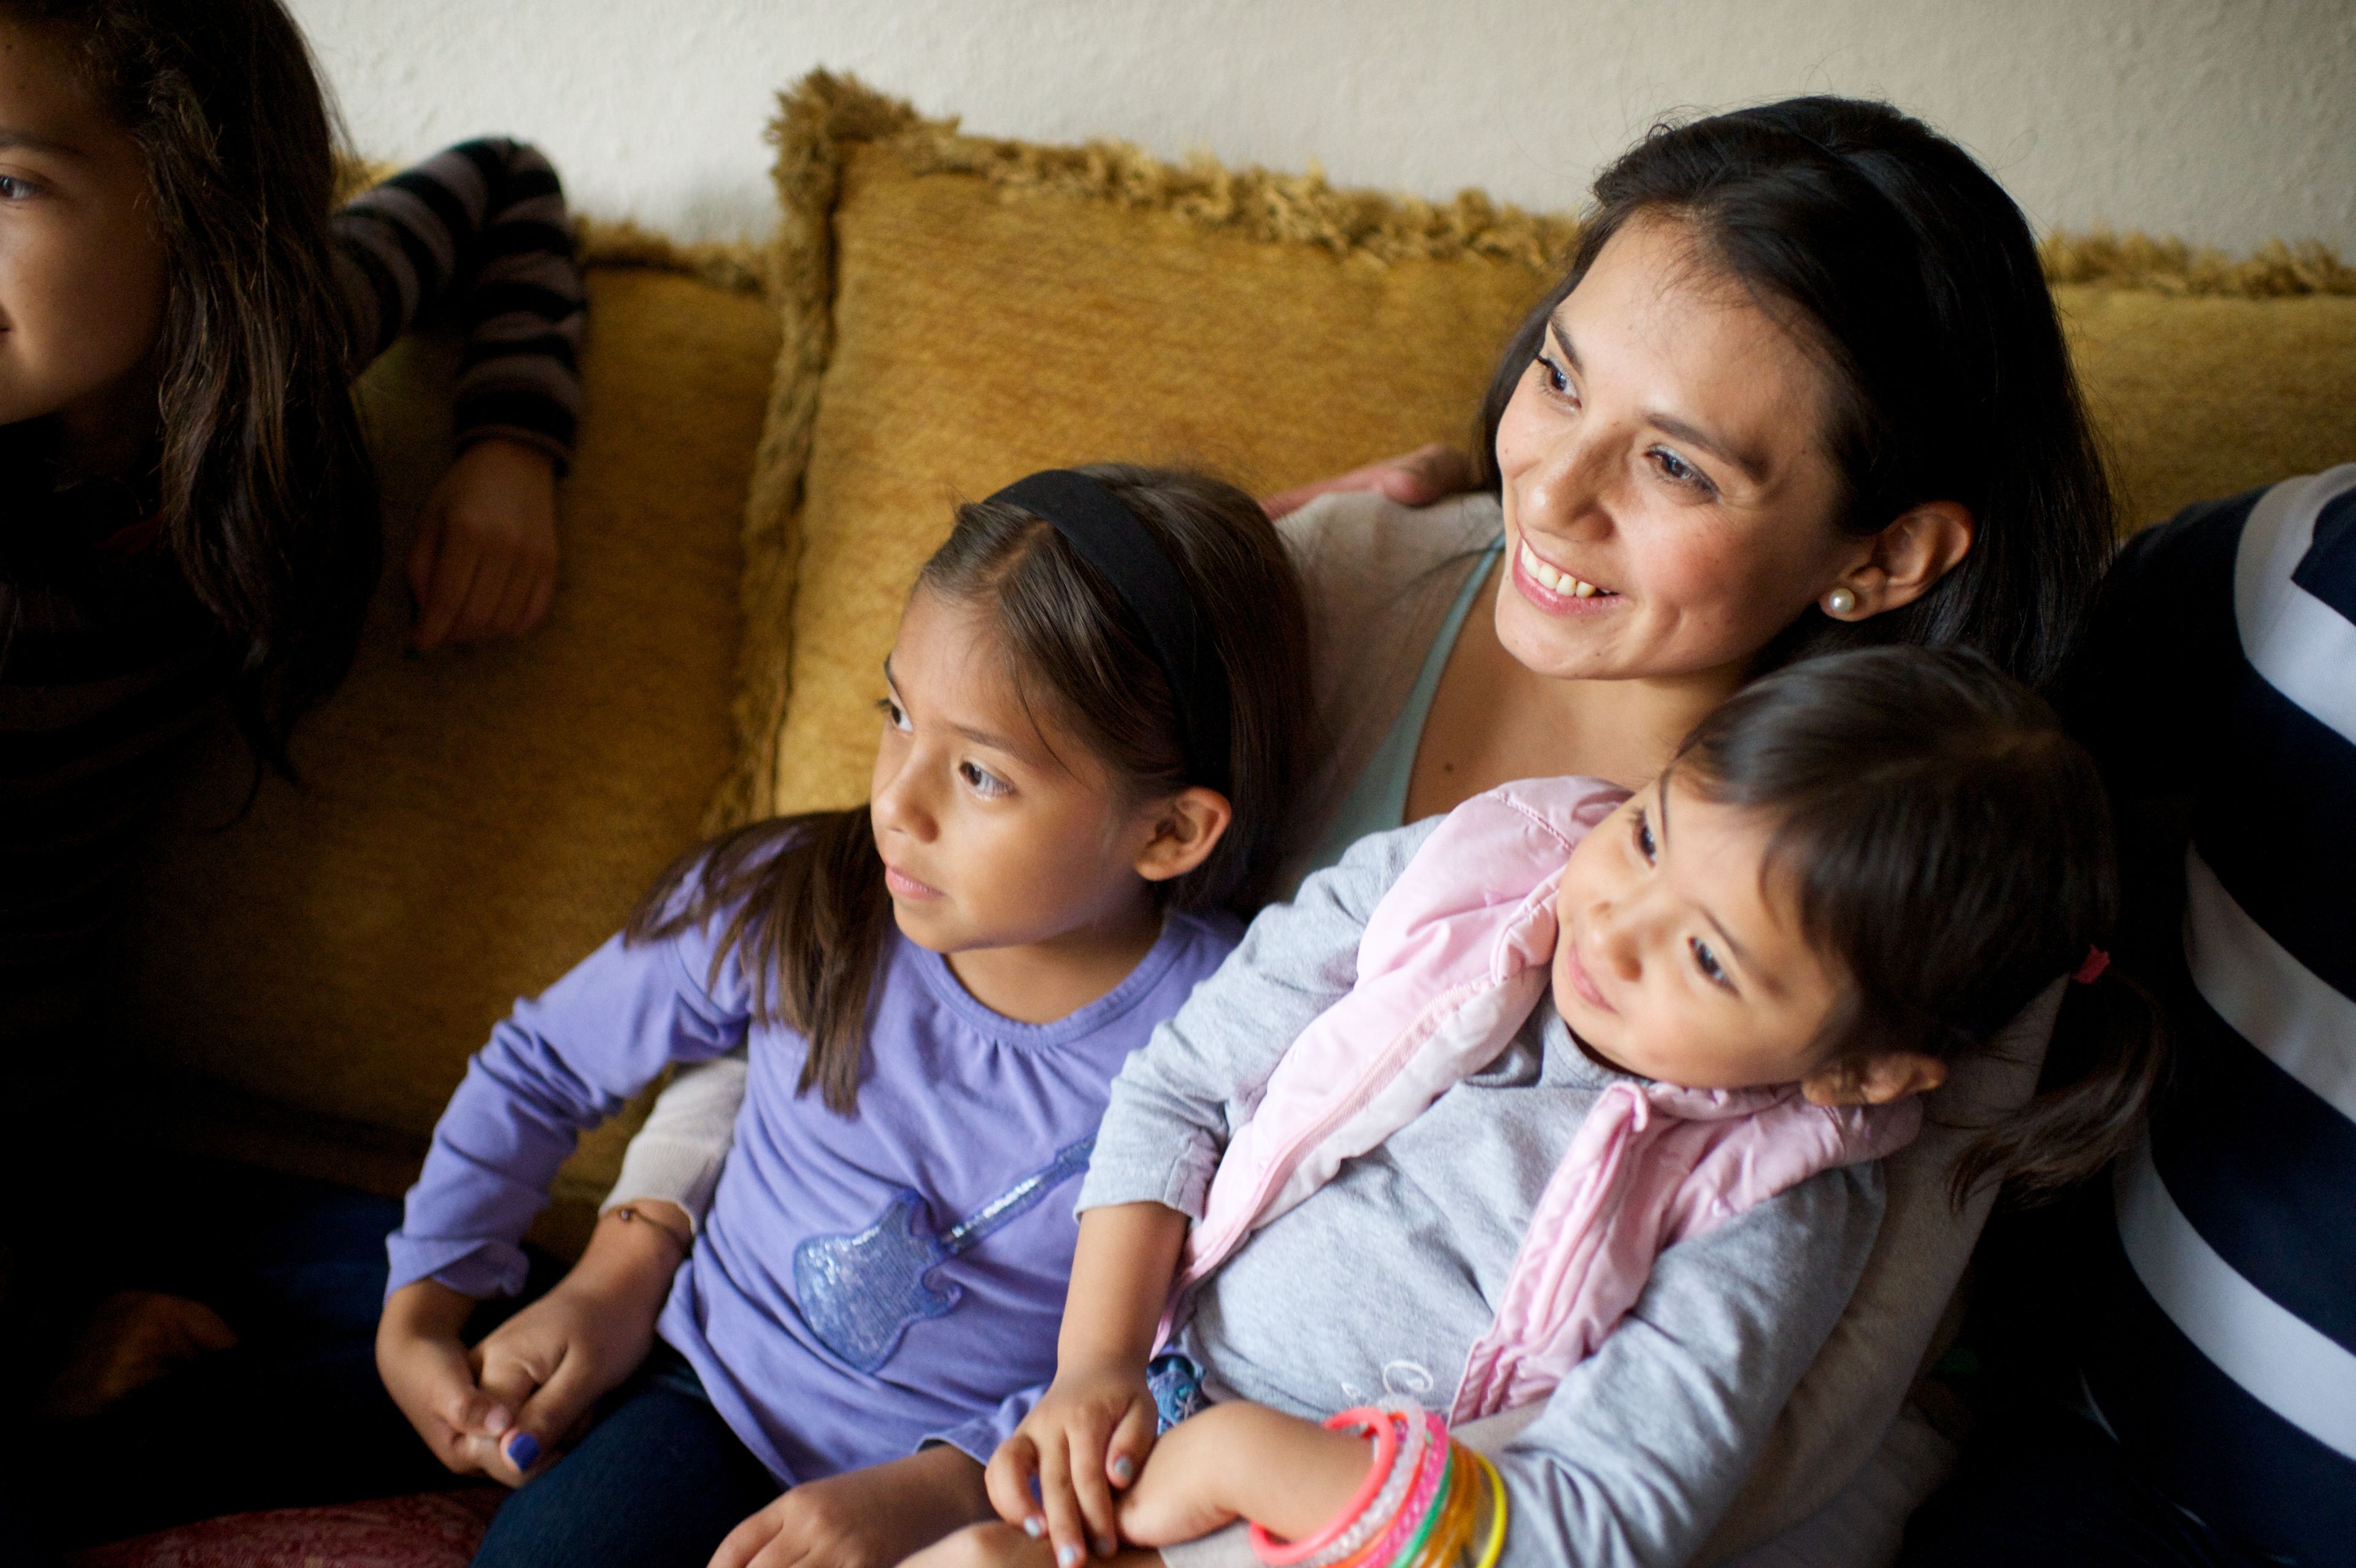 A woman sits on a couch, holding her two daughters on her lap.